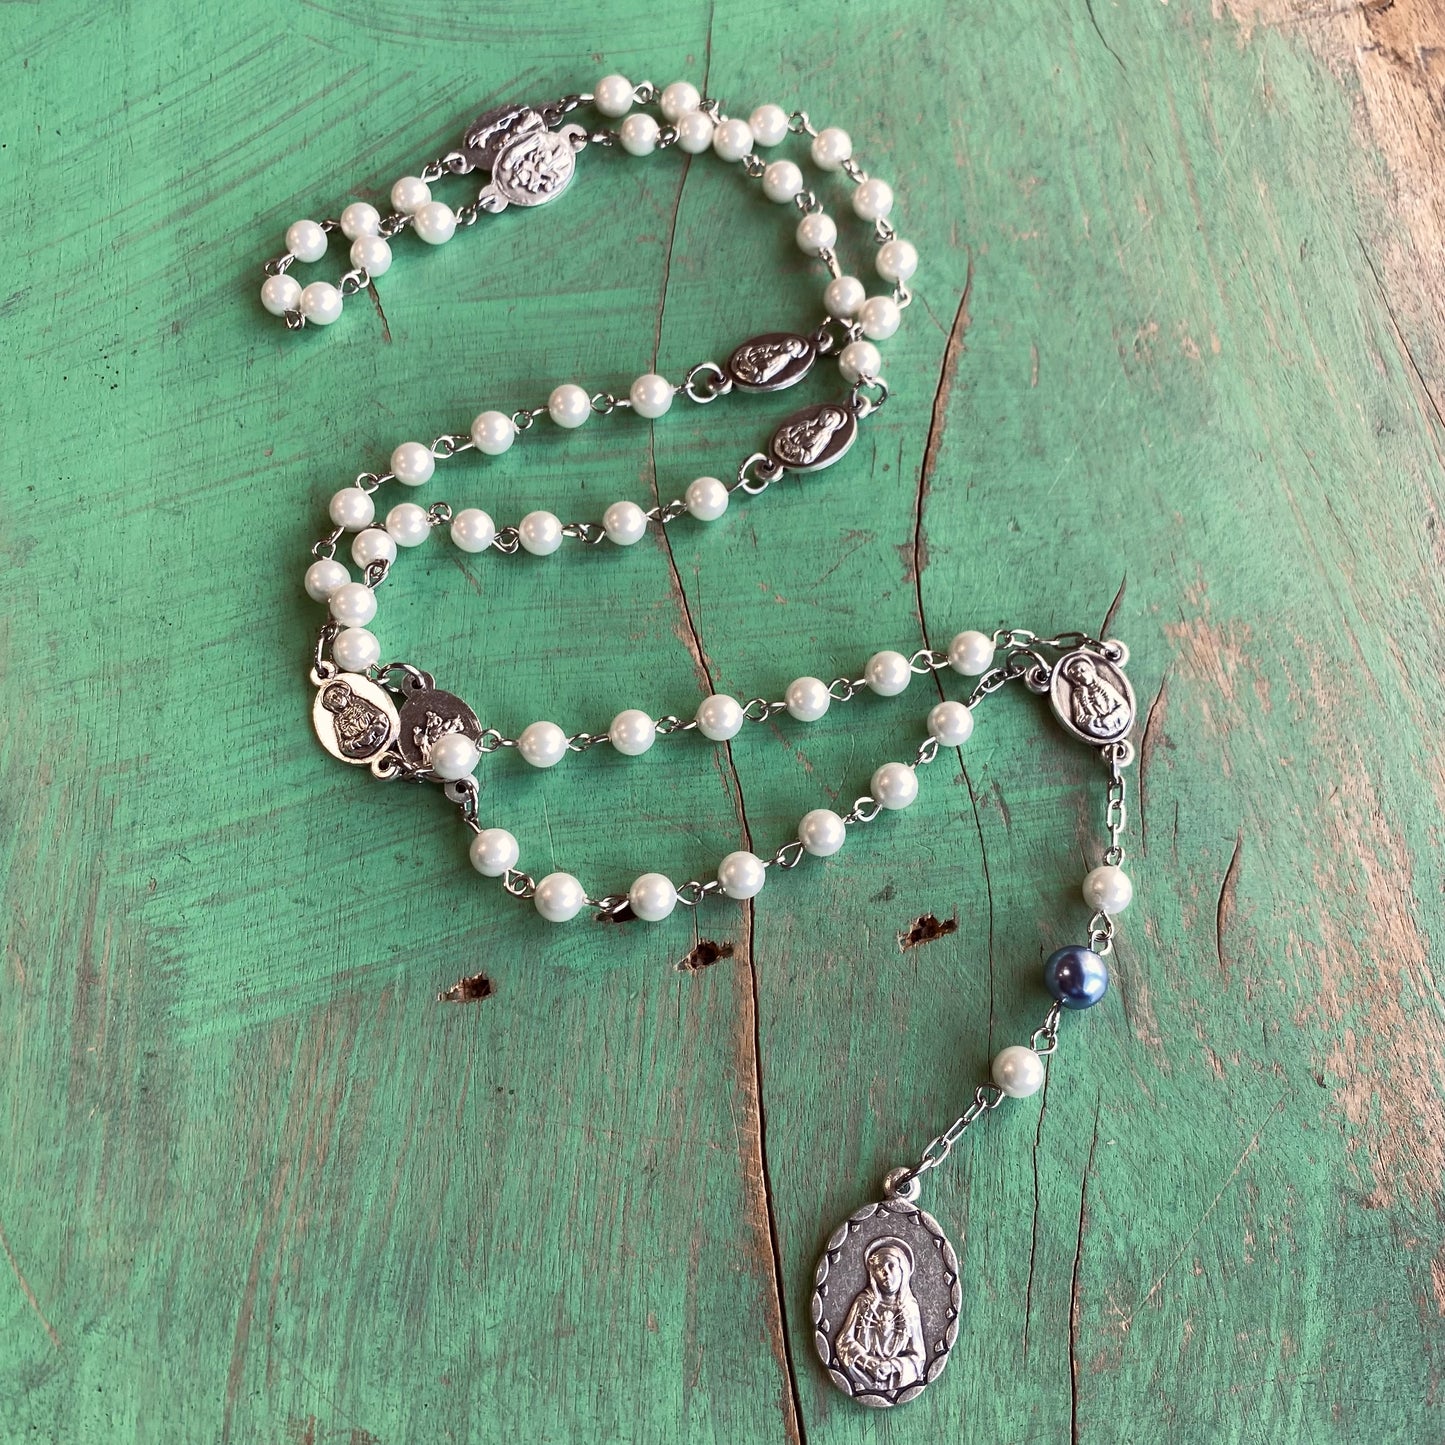 Our Lady of Sorrows Pearl Necklace